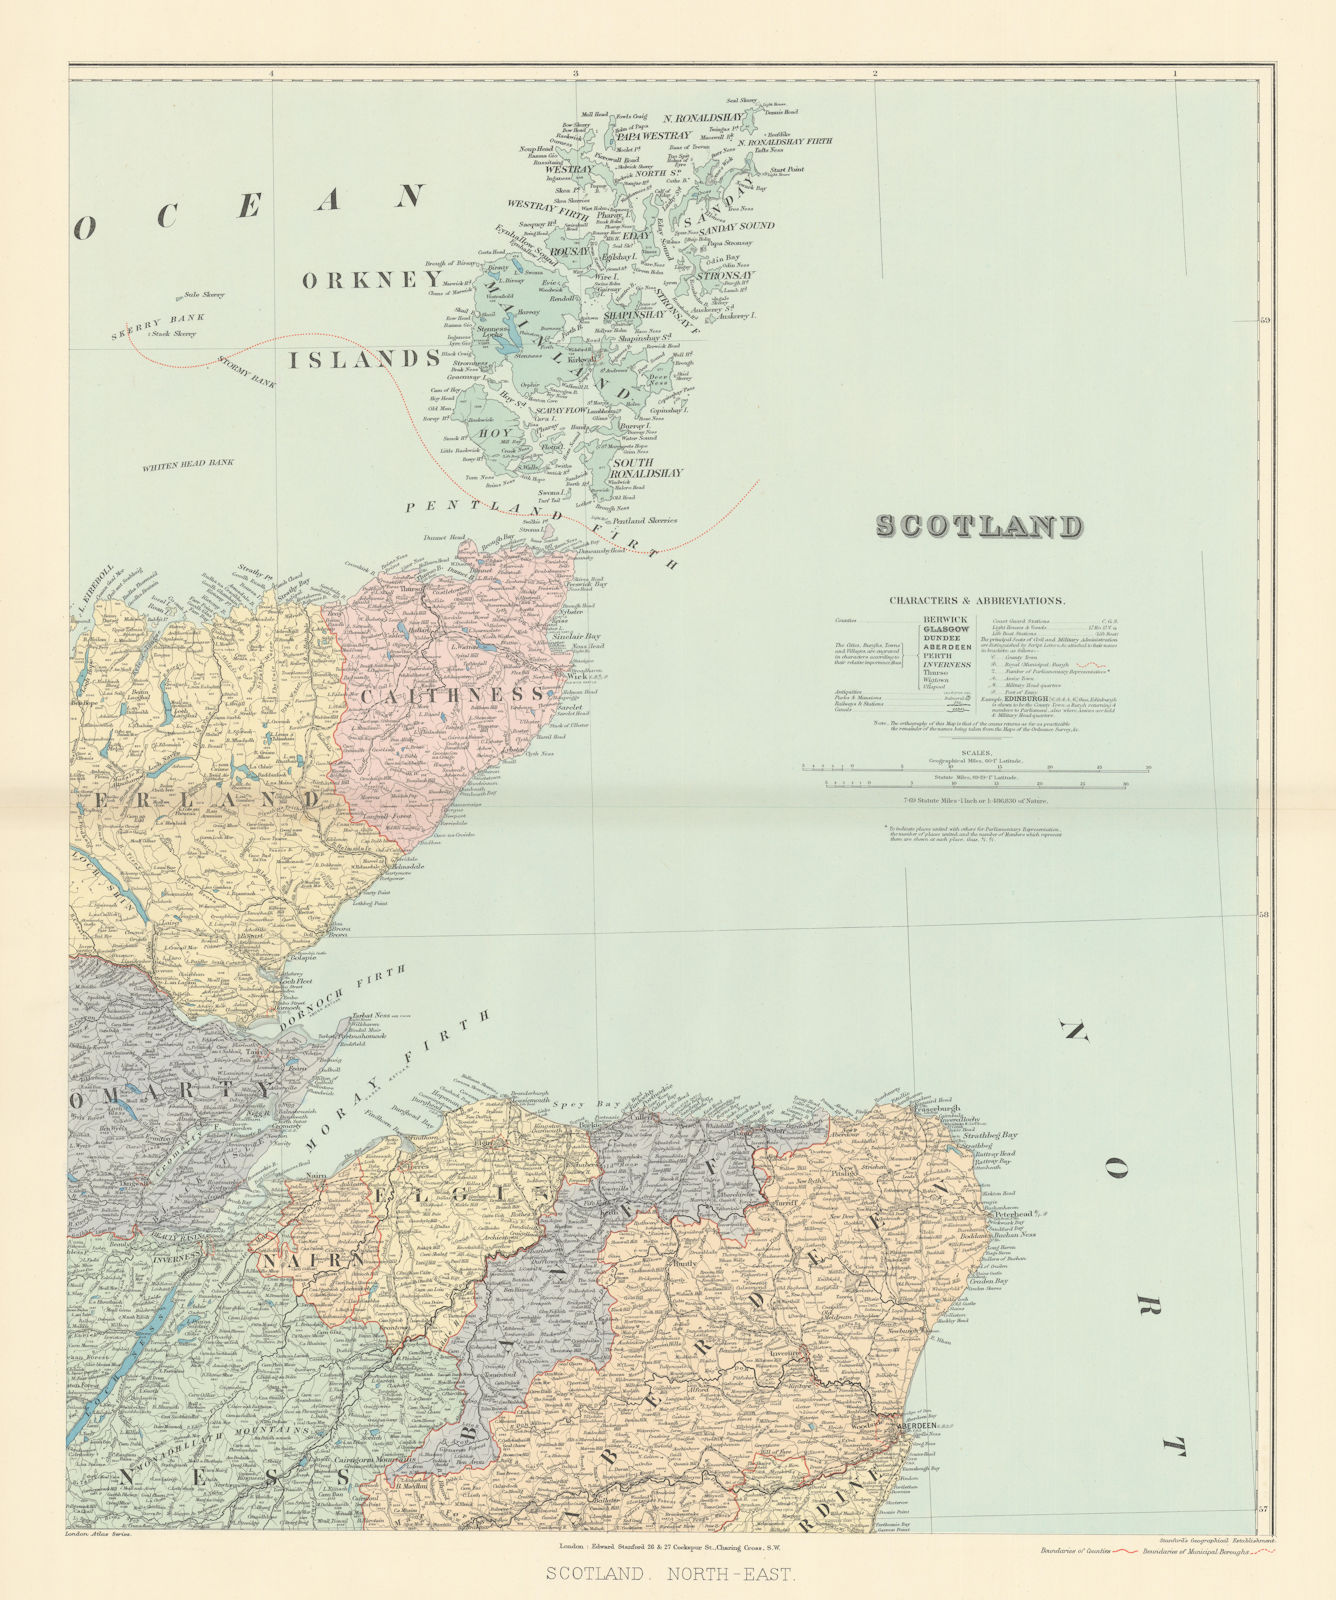 Associate Product Scotland N.E. Orkney Cathiness Banff Elgin Aberdeen Sutherland STANFORD 1896 map